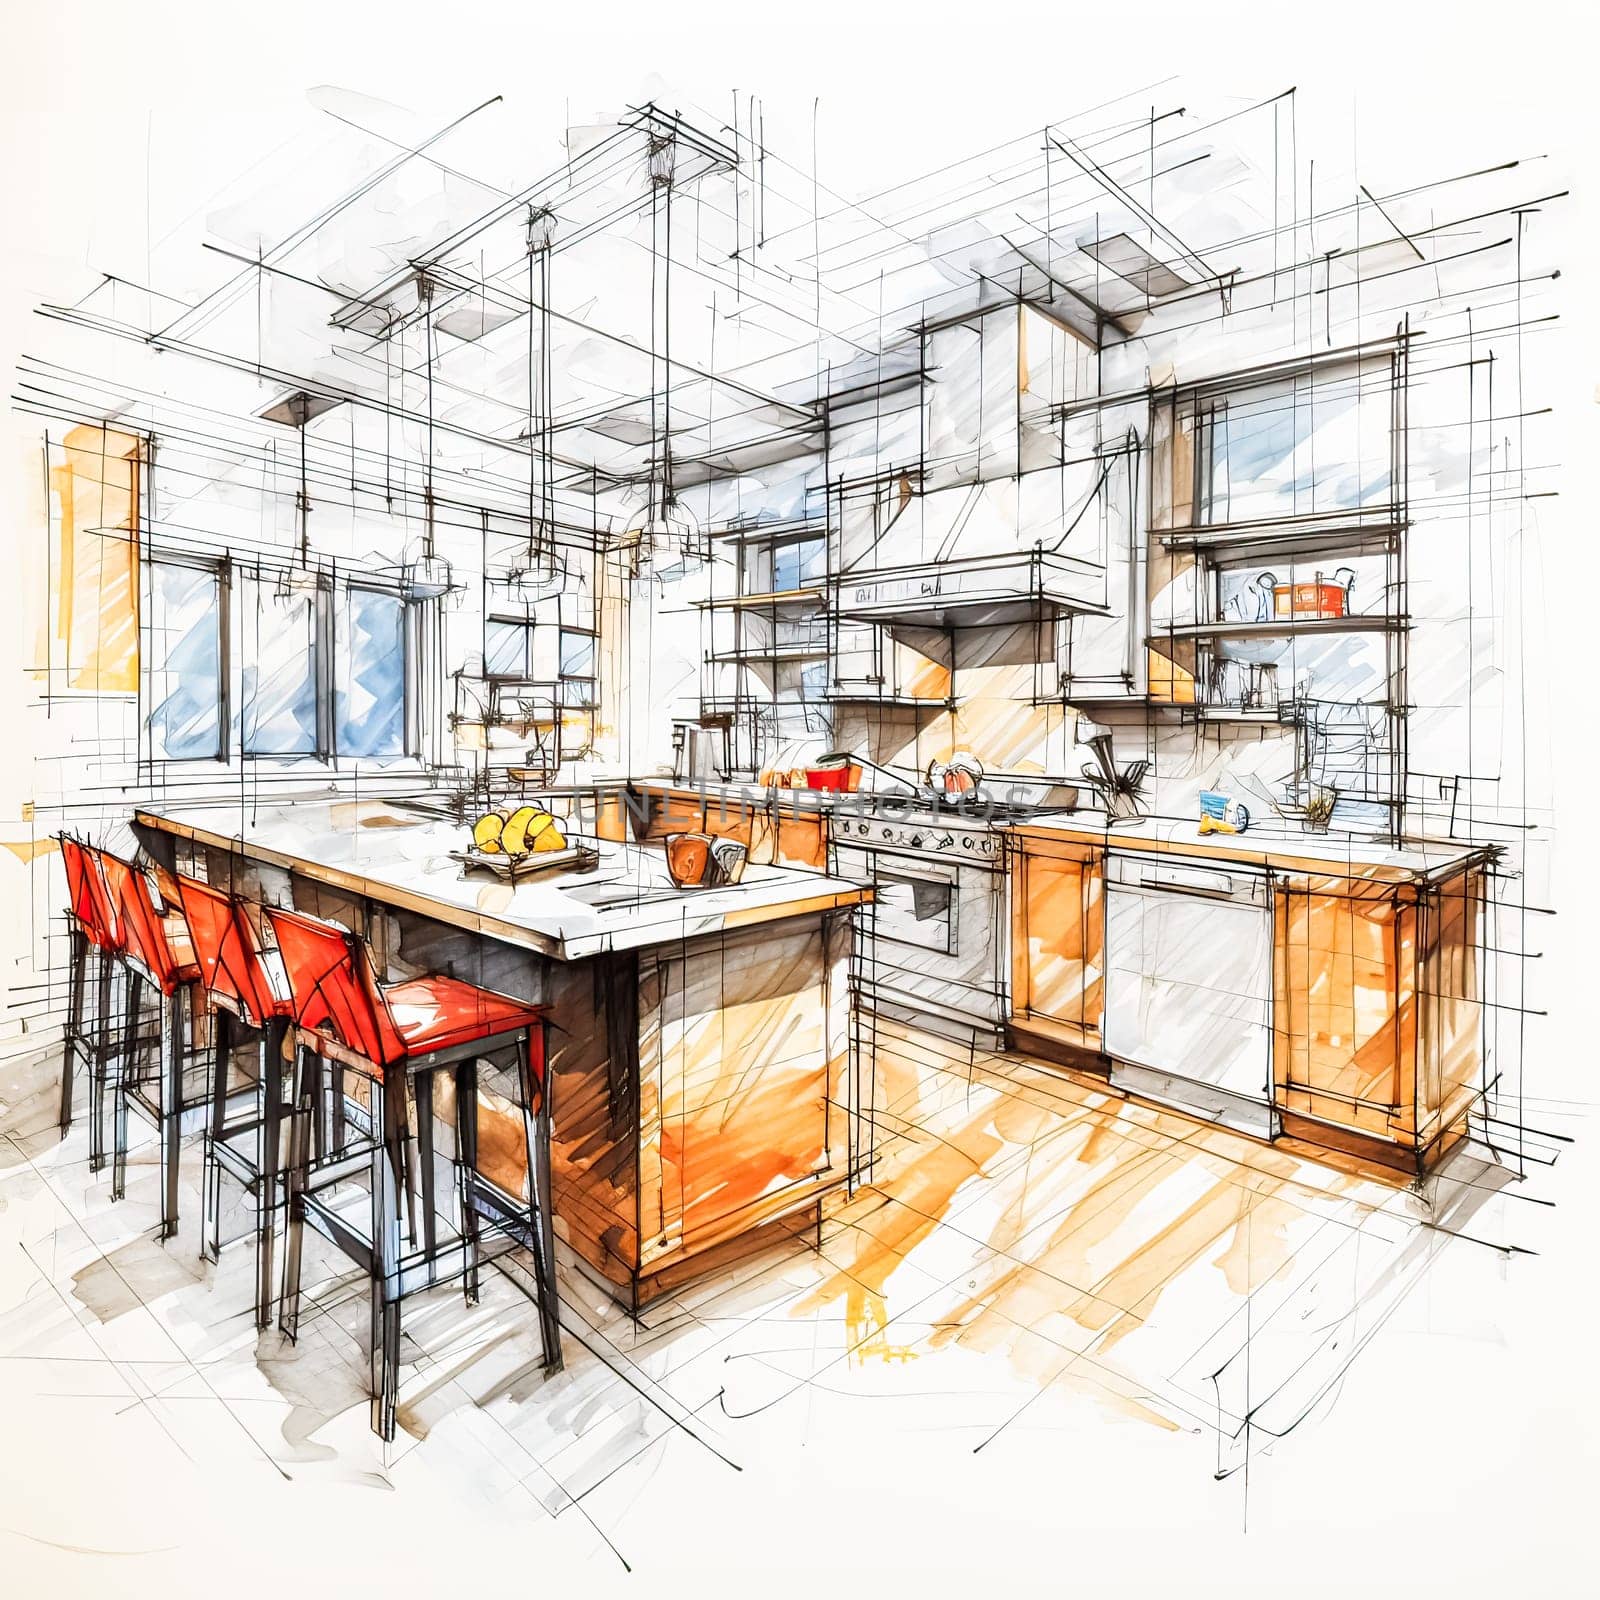 Sketching Elegance, Watercolor artwork showcases an American modern style kitchen, a blend of design and creativity